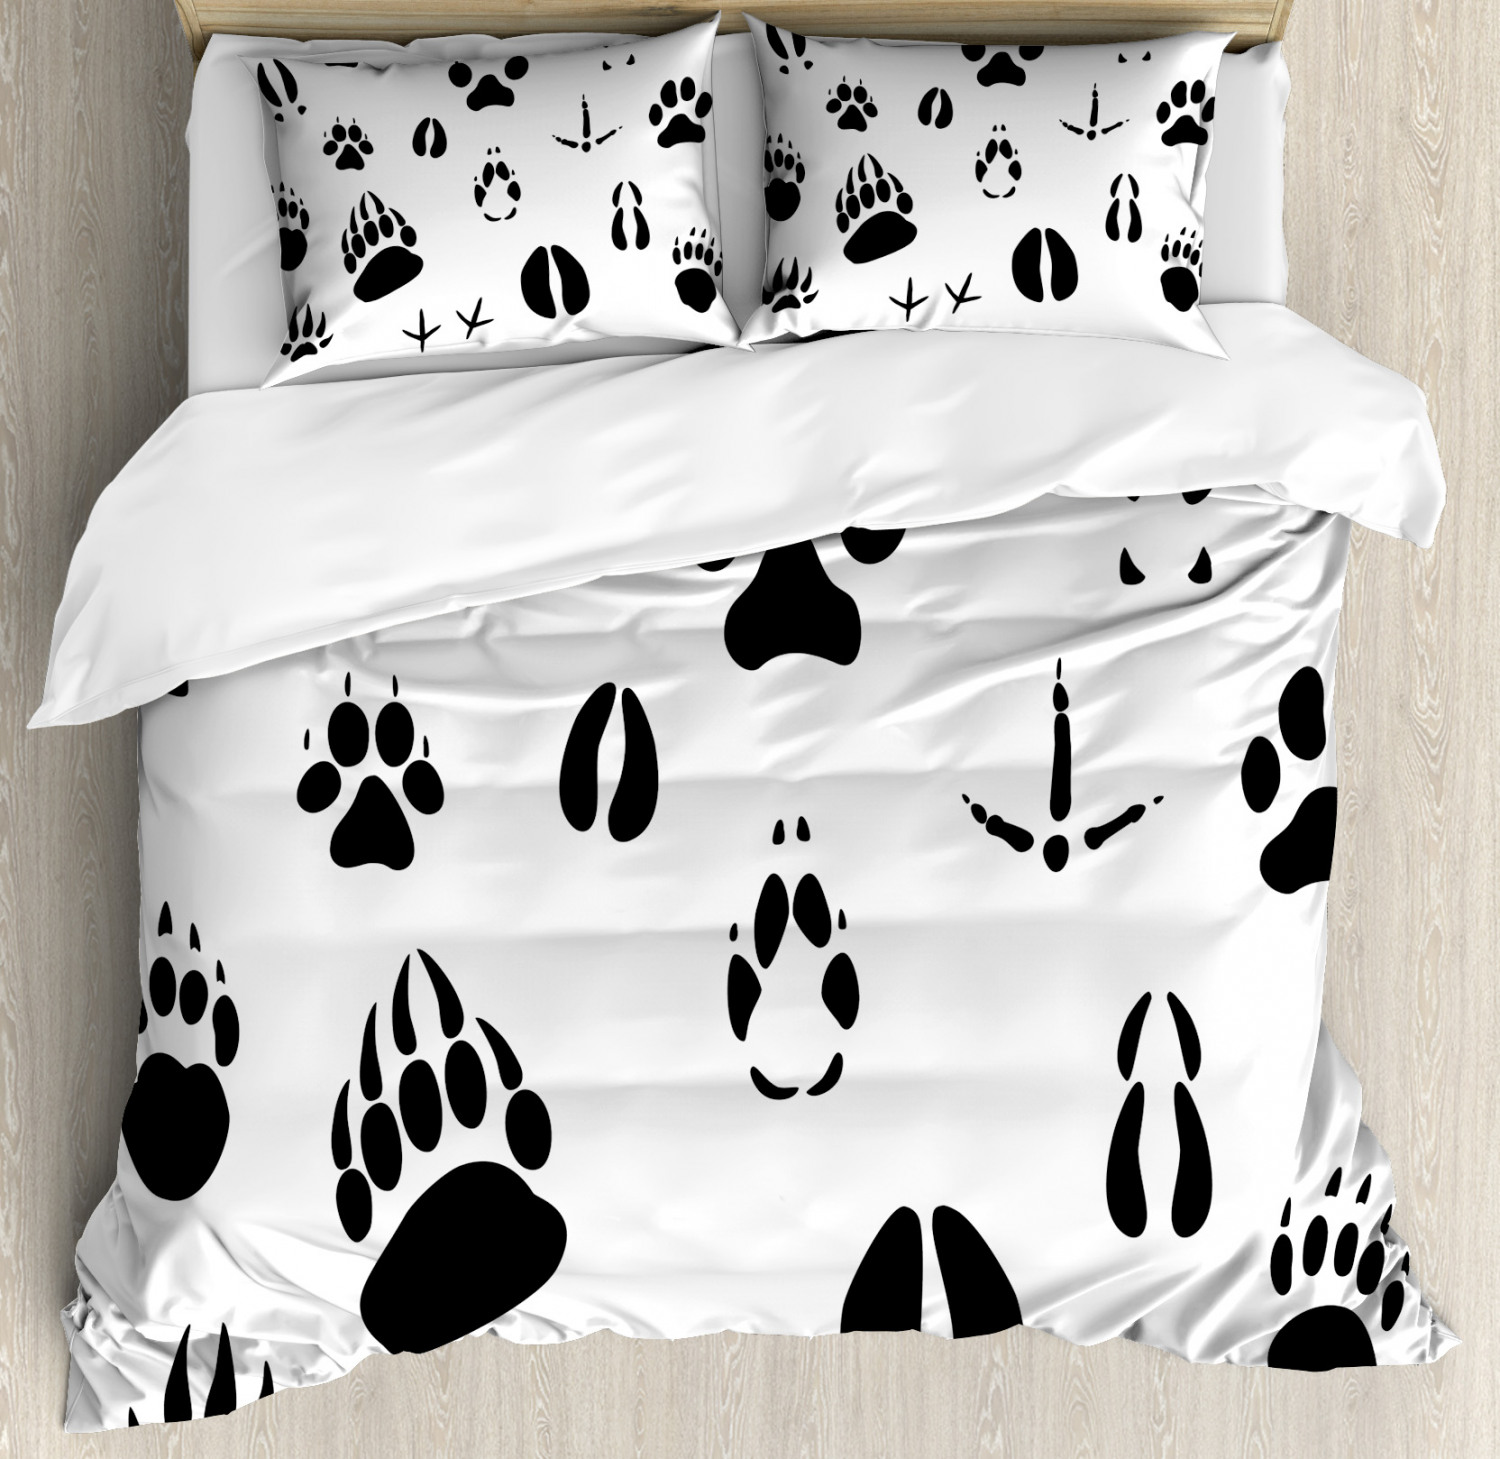 Hunting Duvet Cover Set With Pillow Shams Wild Animal Footprints